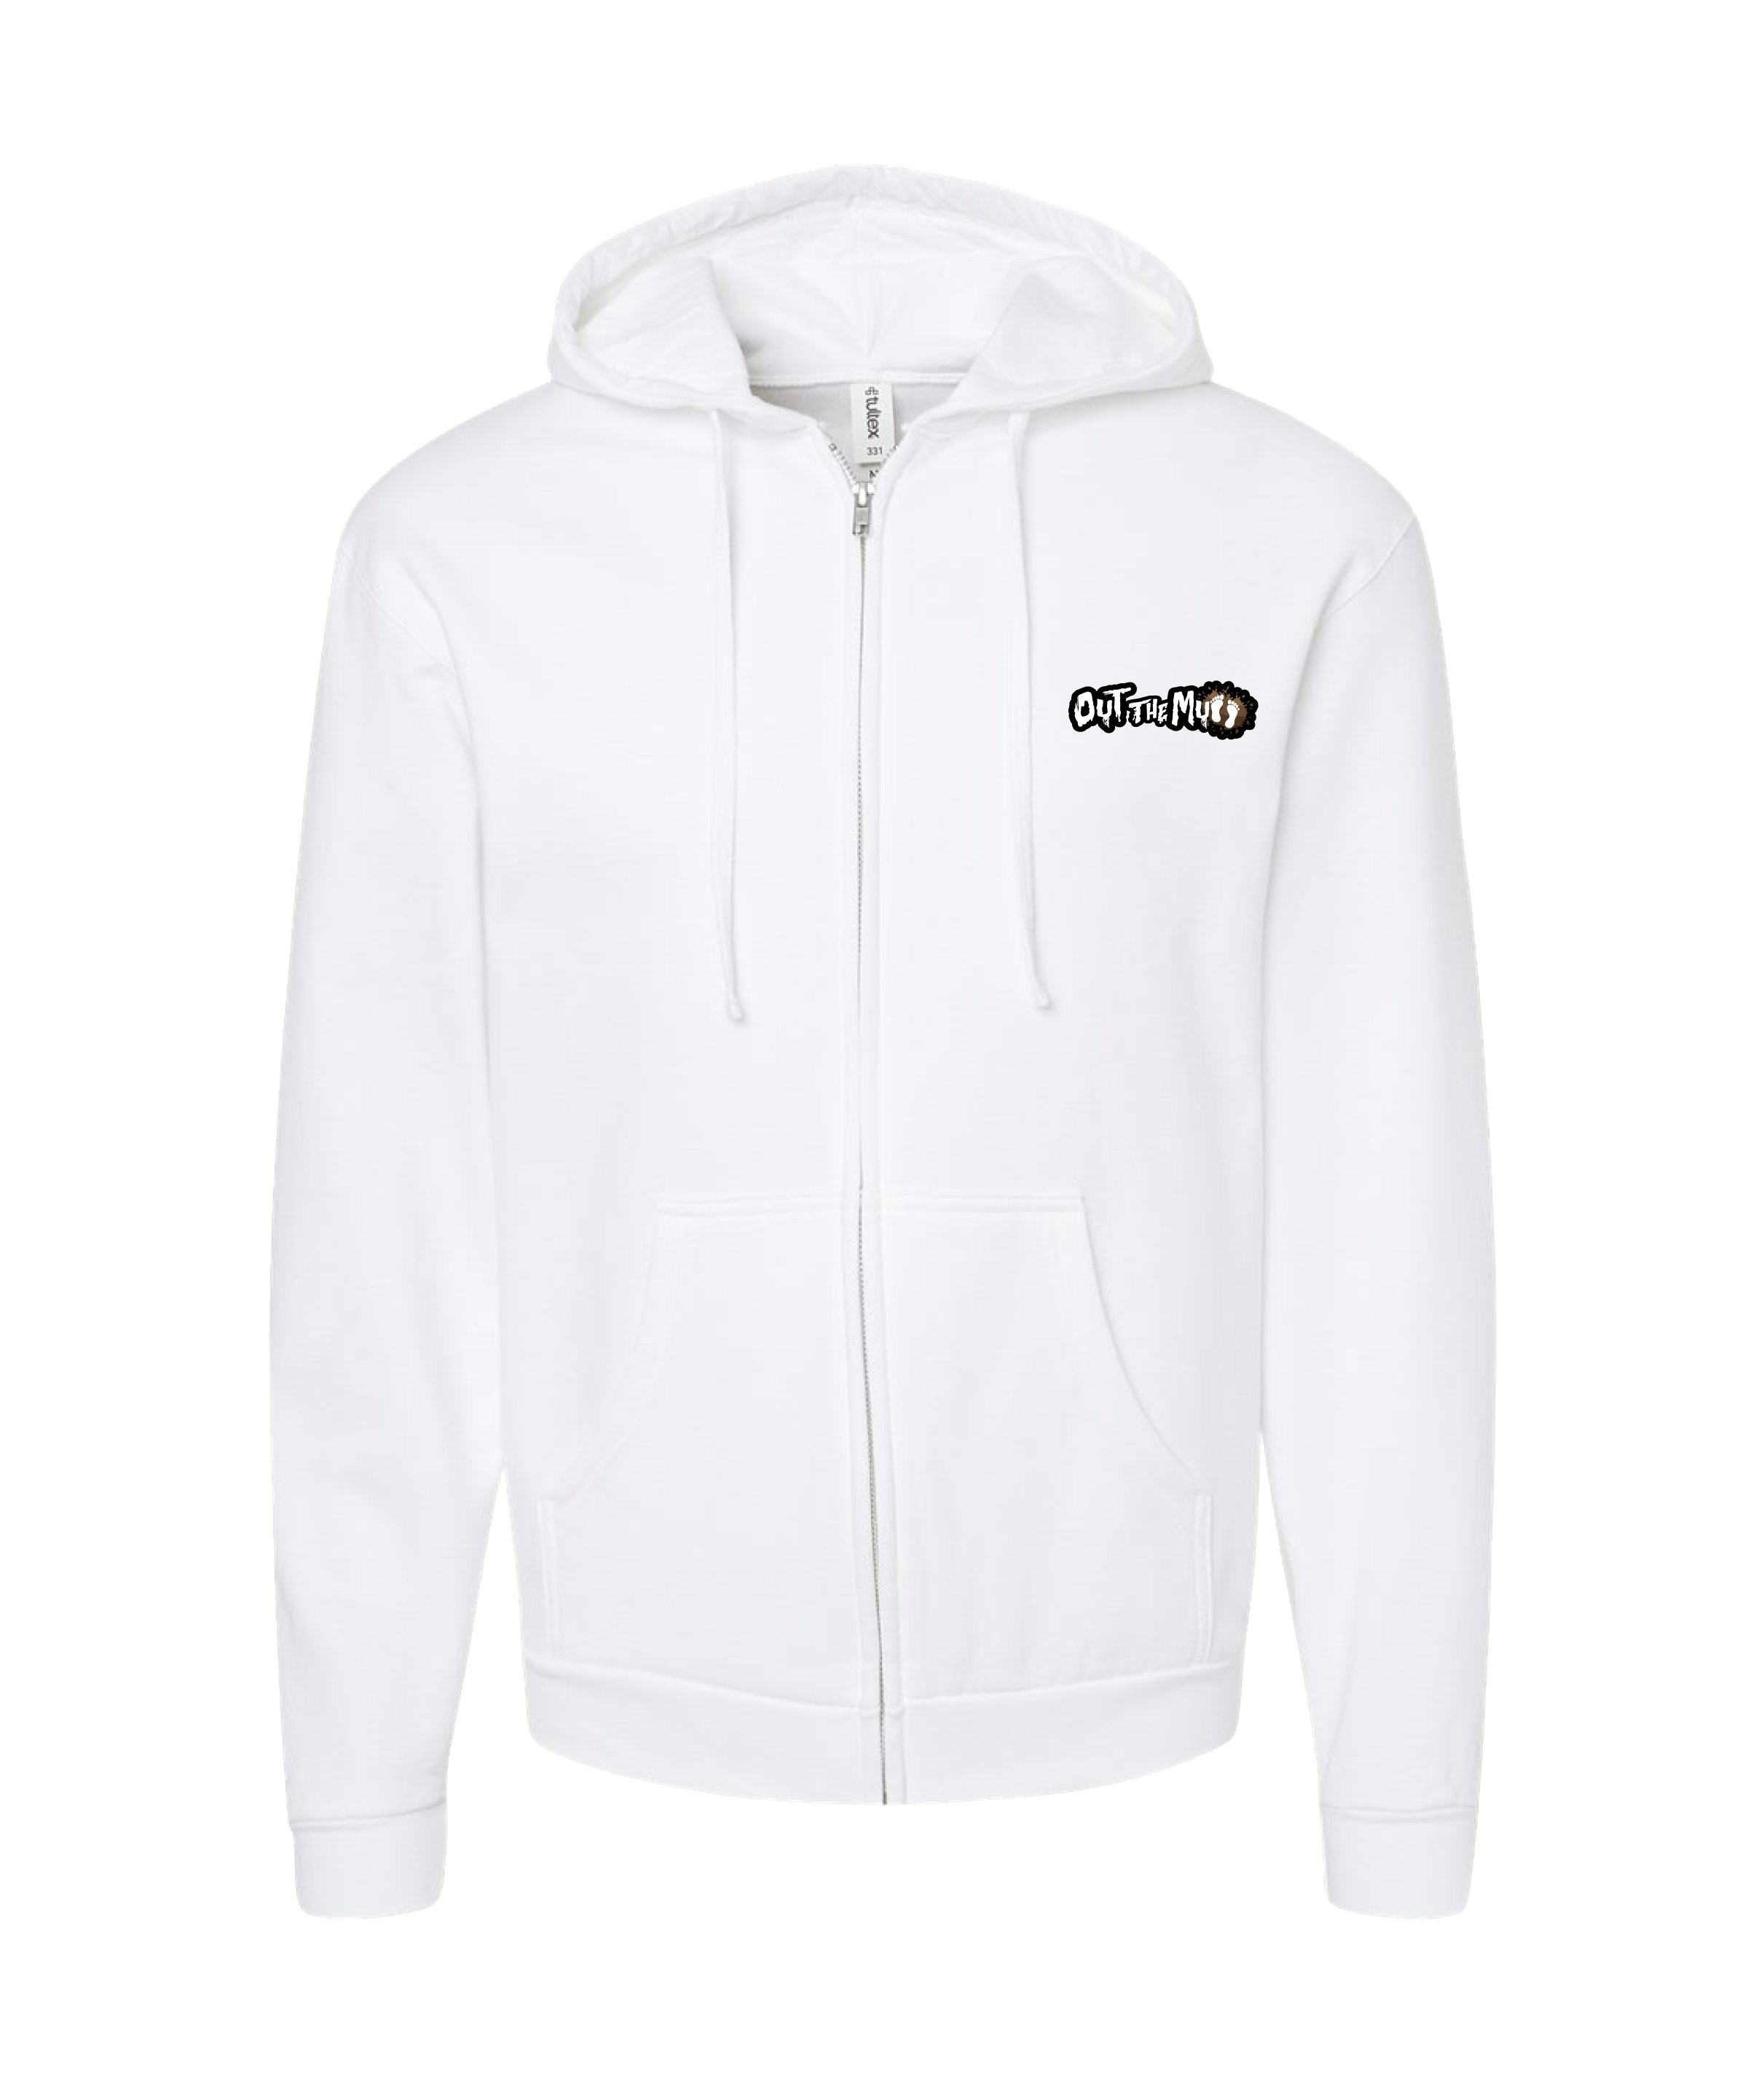 04 APPROVED - OUT THE MUD - White Zip Up Hoodie – MerchBooth.com